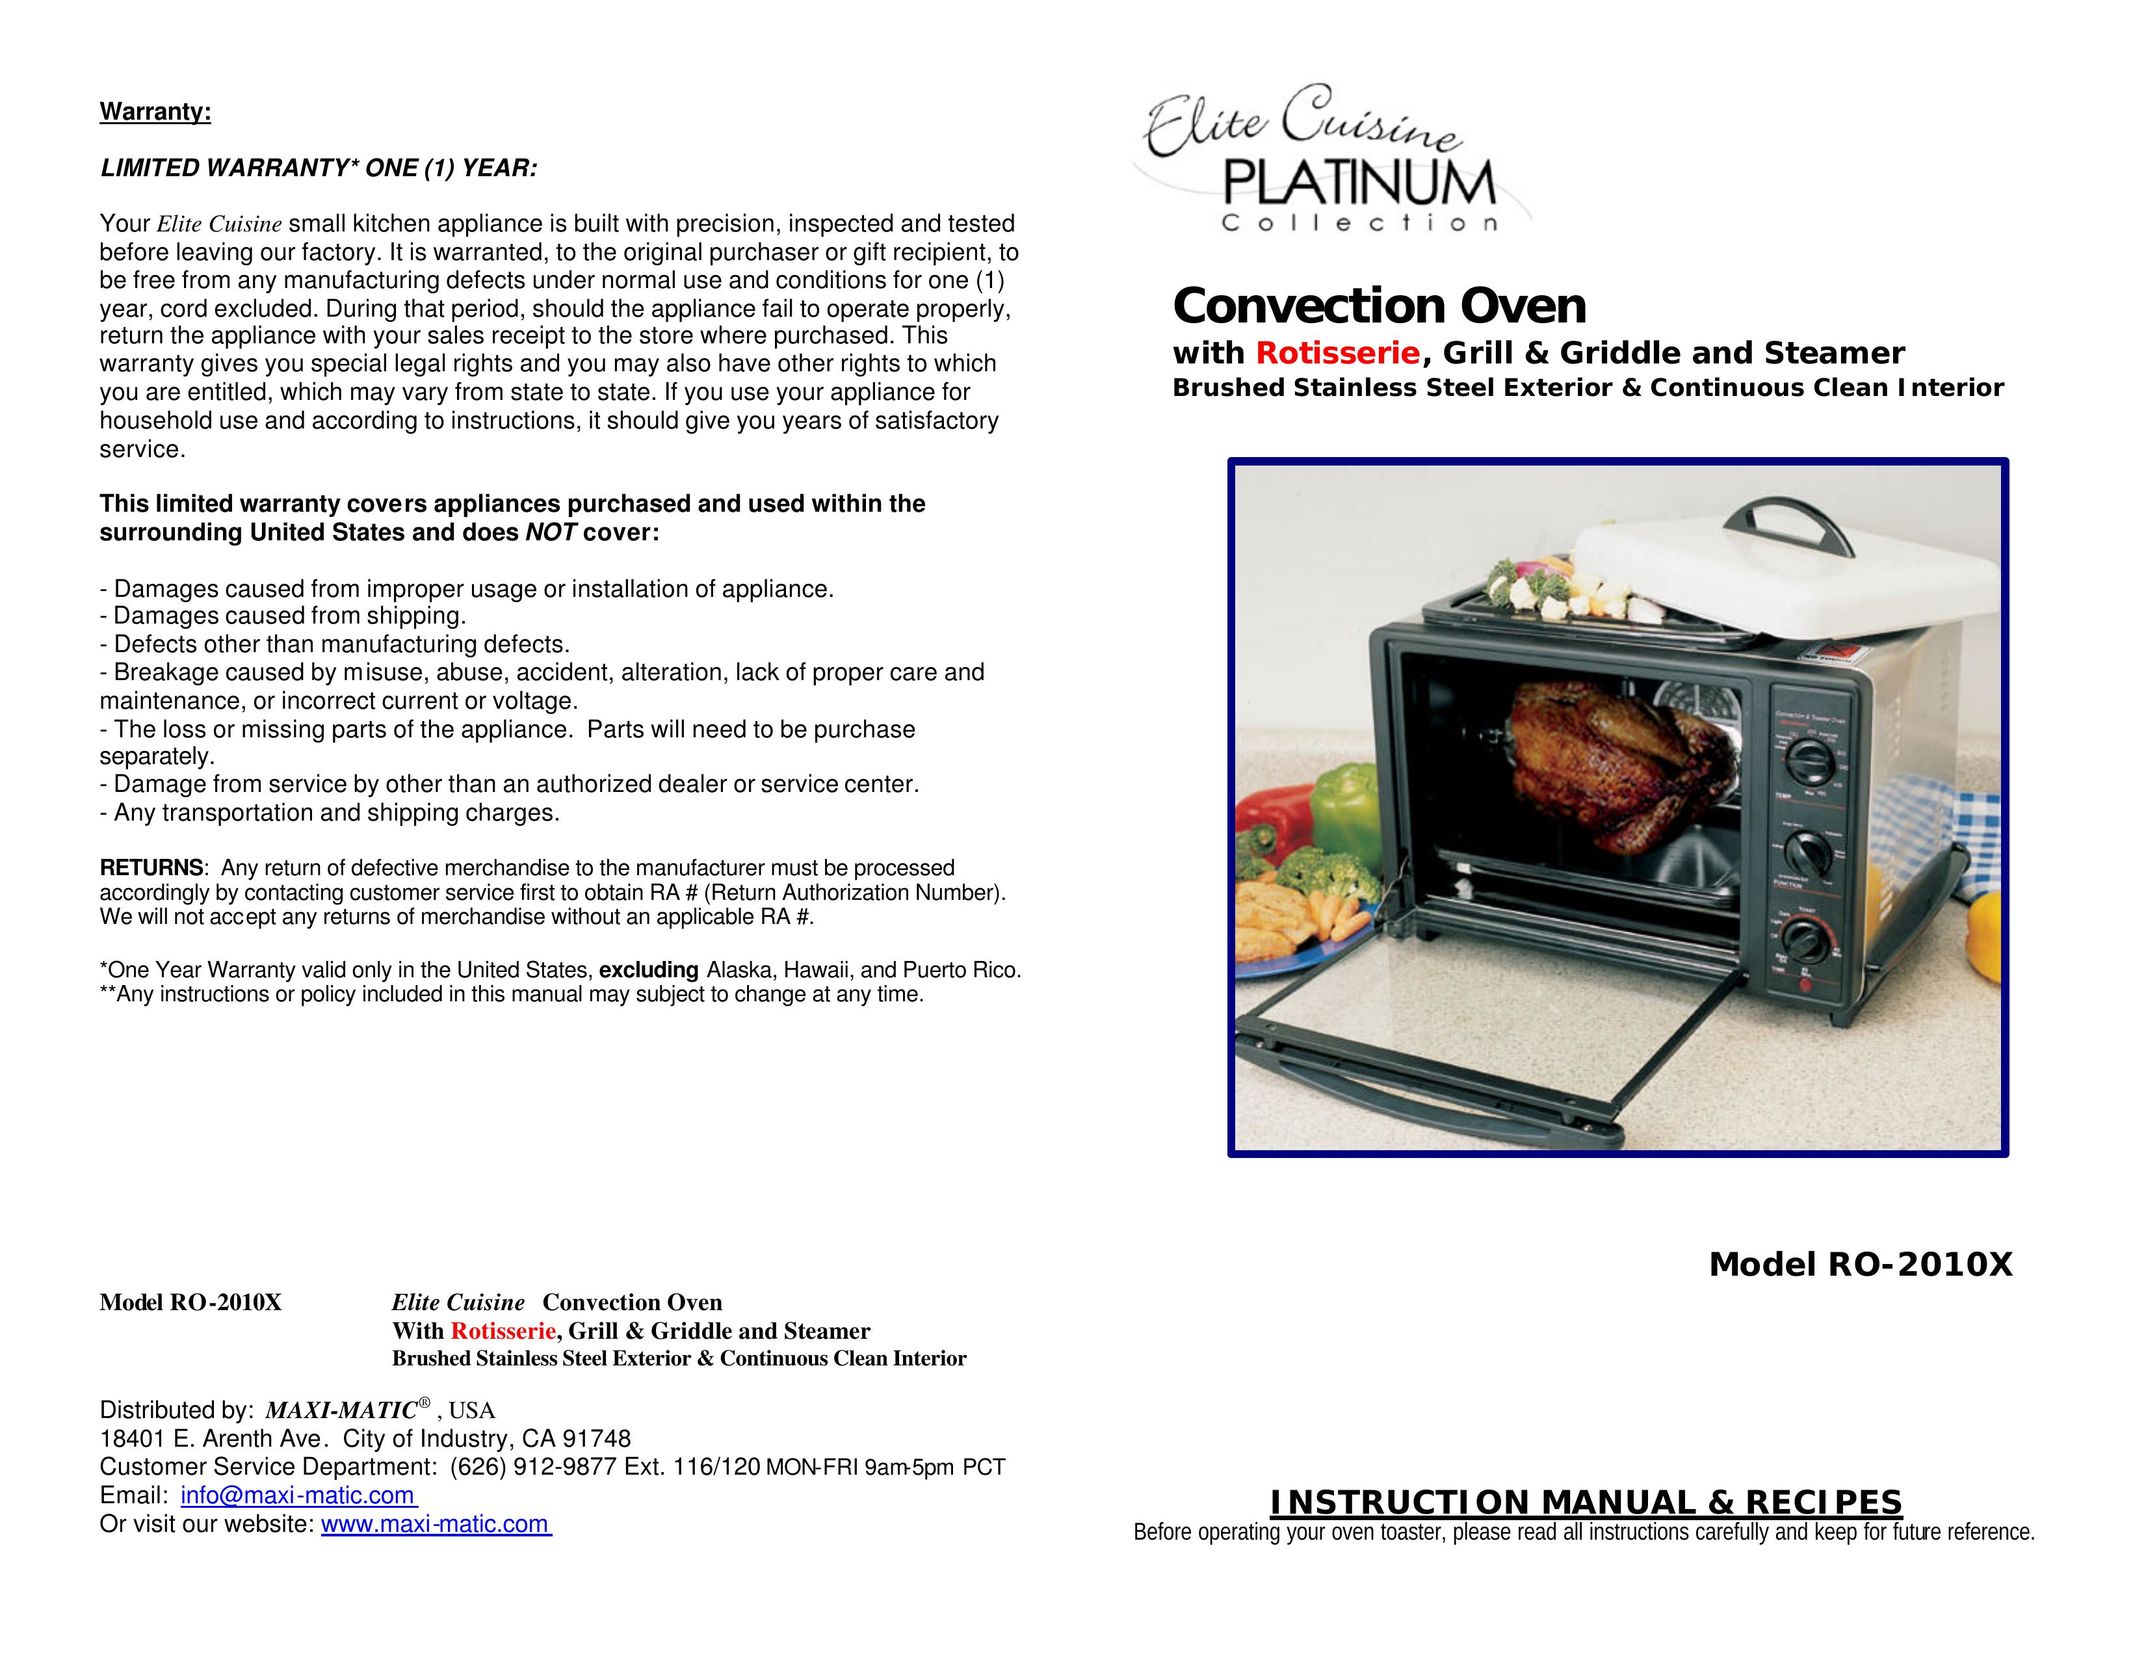 Maximatic RO-2010X Convection Oven User Manual